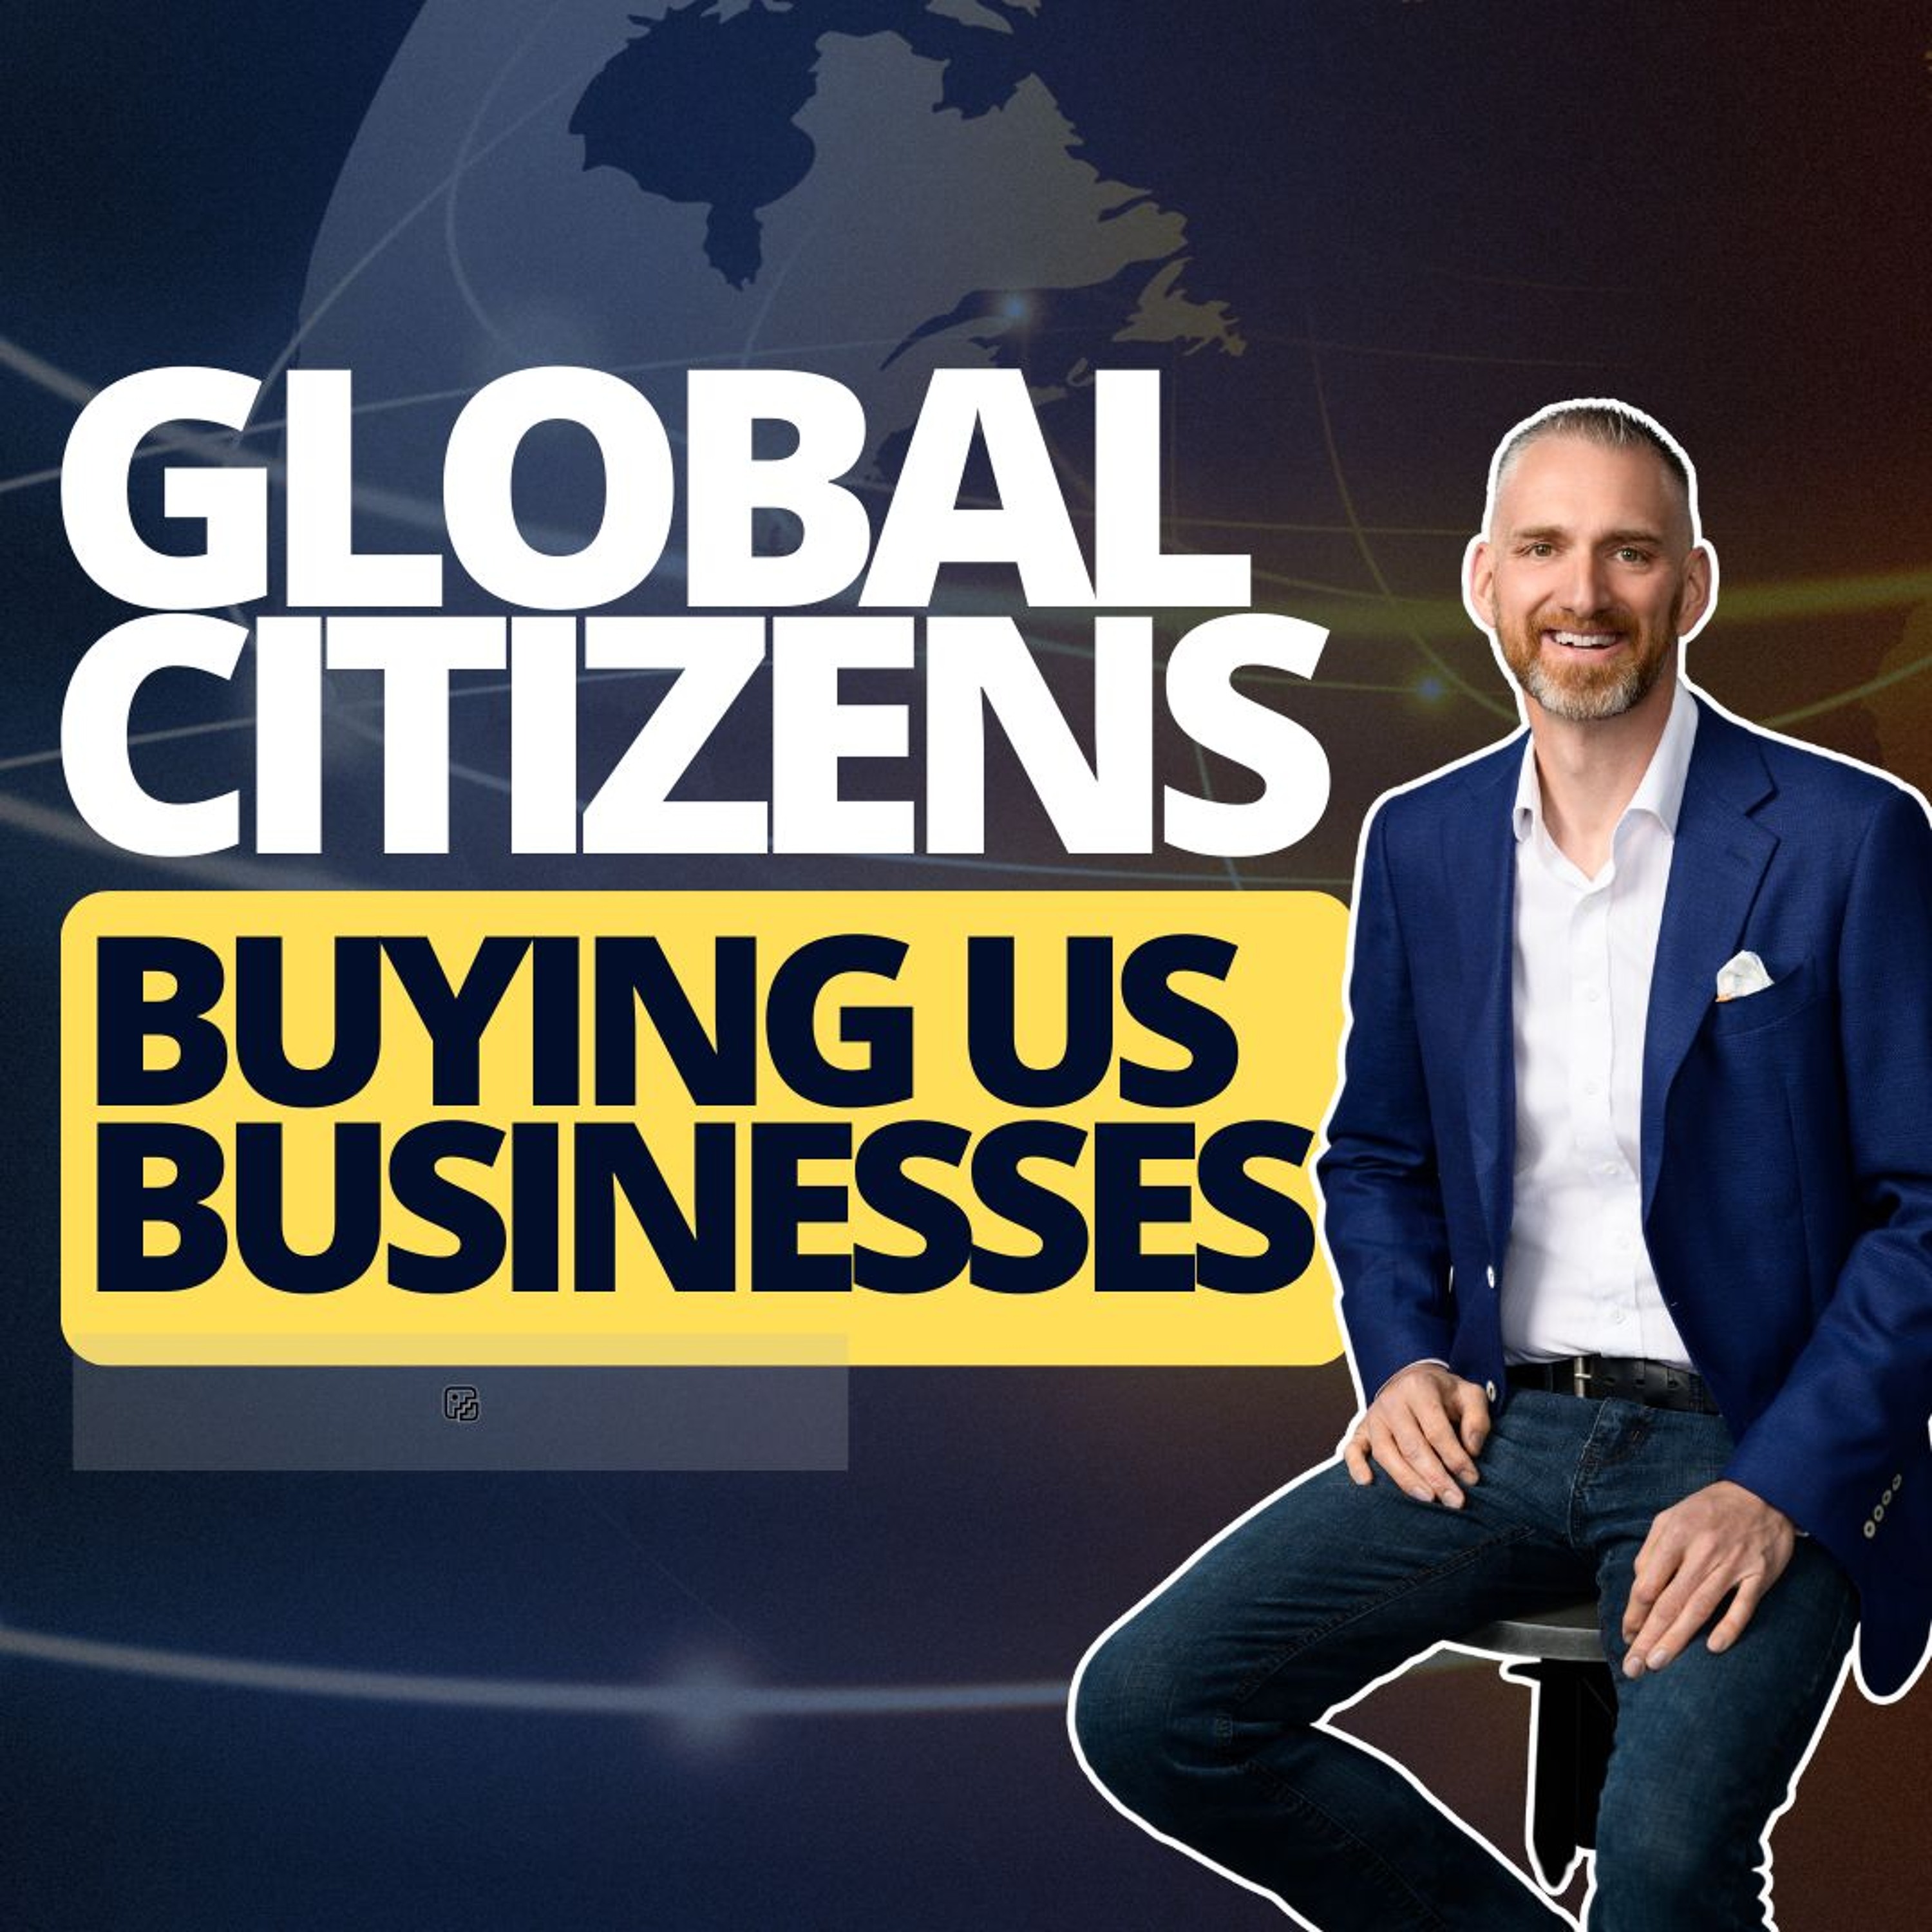 Global Citizens Buying US Businesses (1)